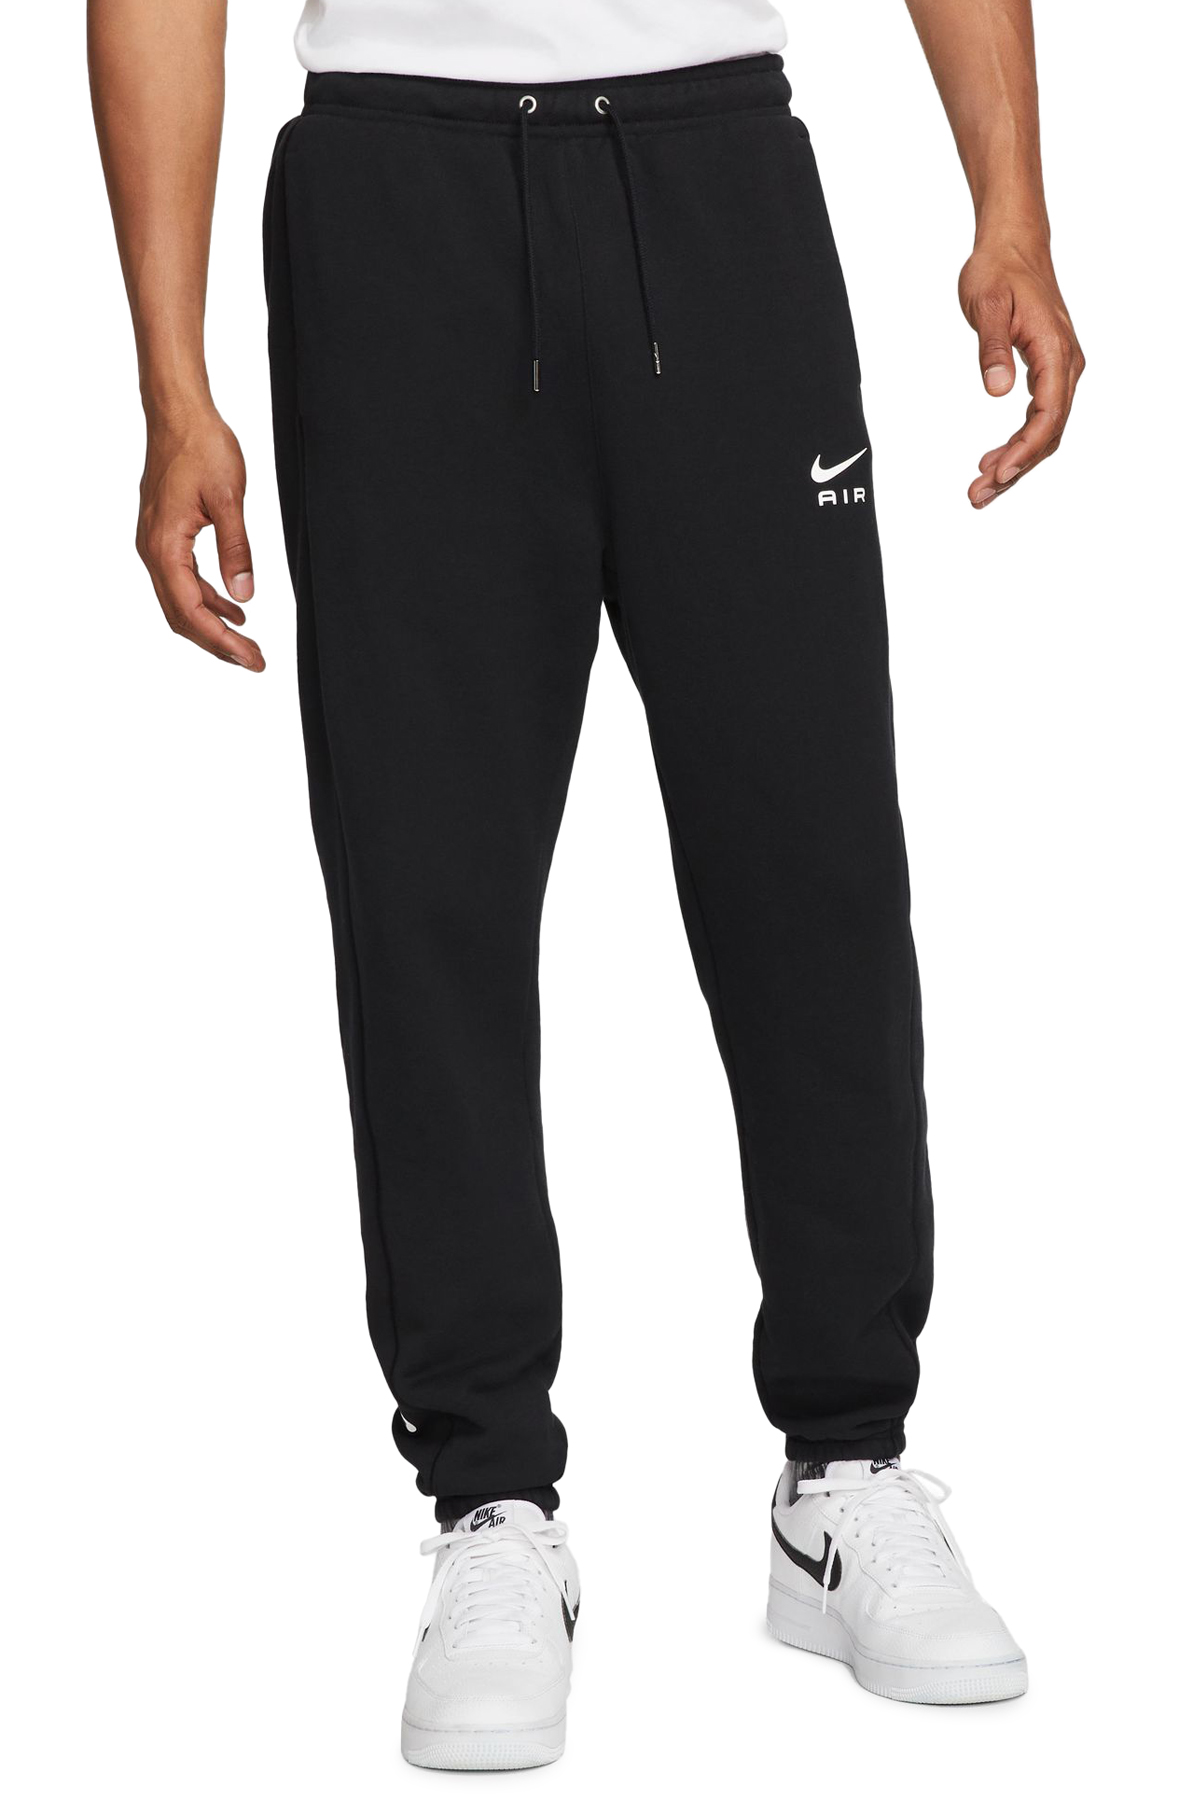 Soft French Terry Joggers With Shoe Lace Tie - Black